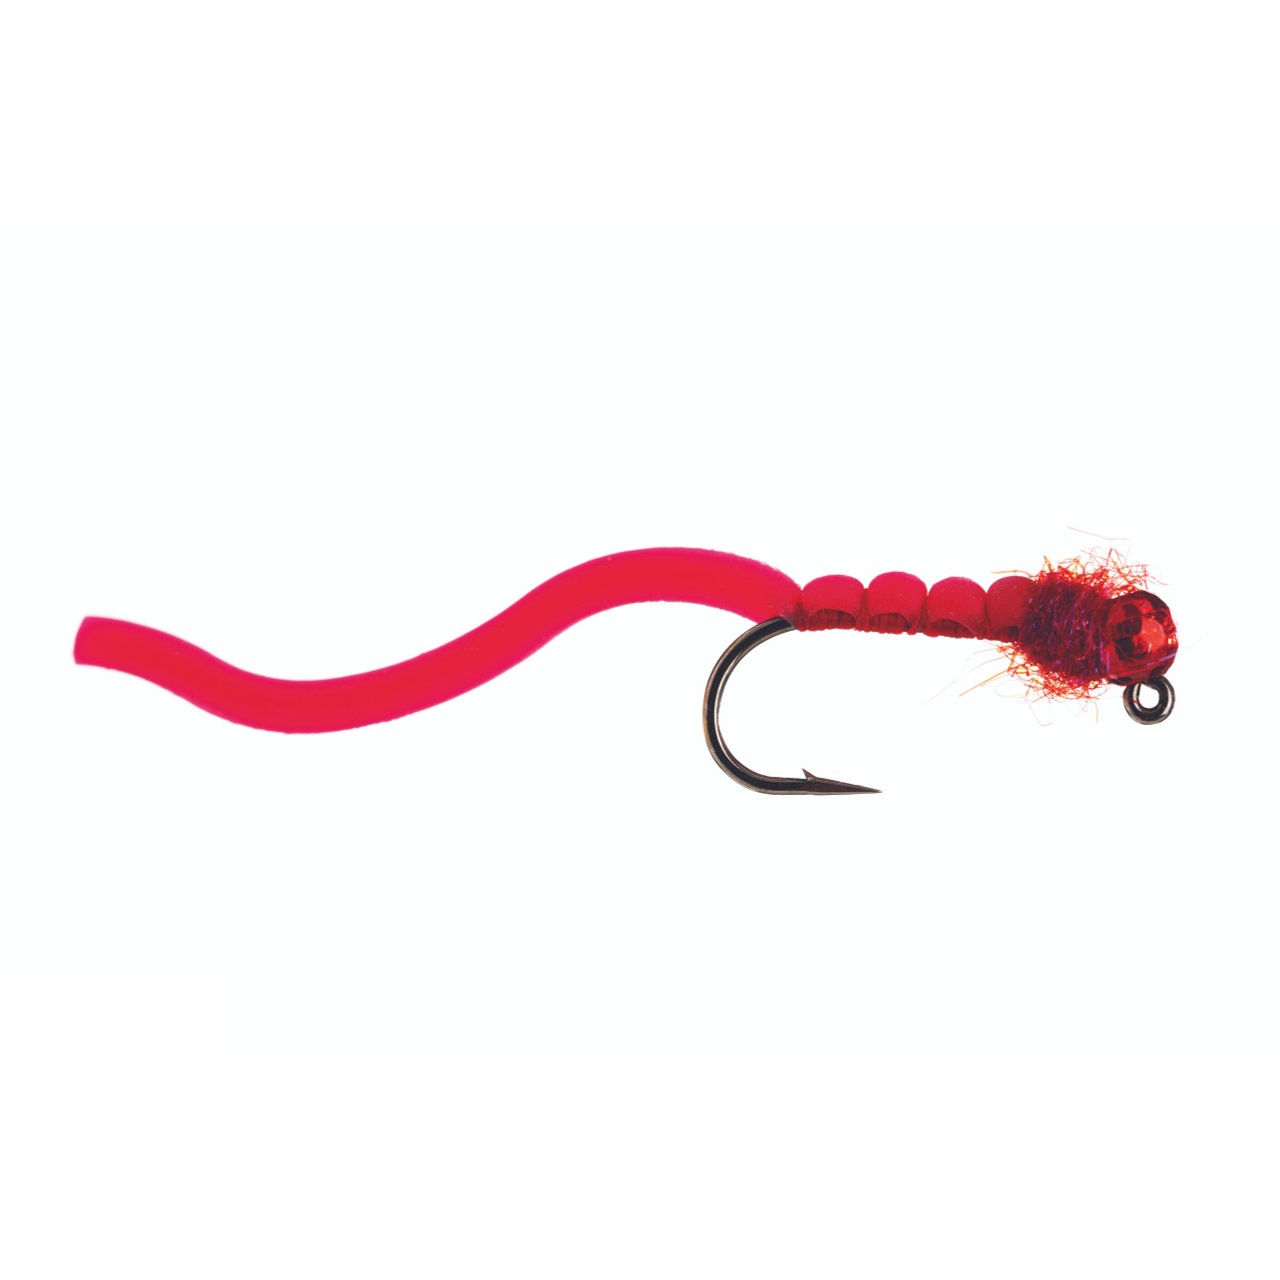 Squirmy Wormie Jig (blood red)